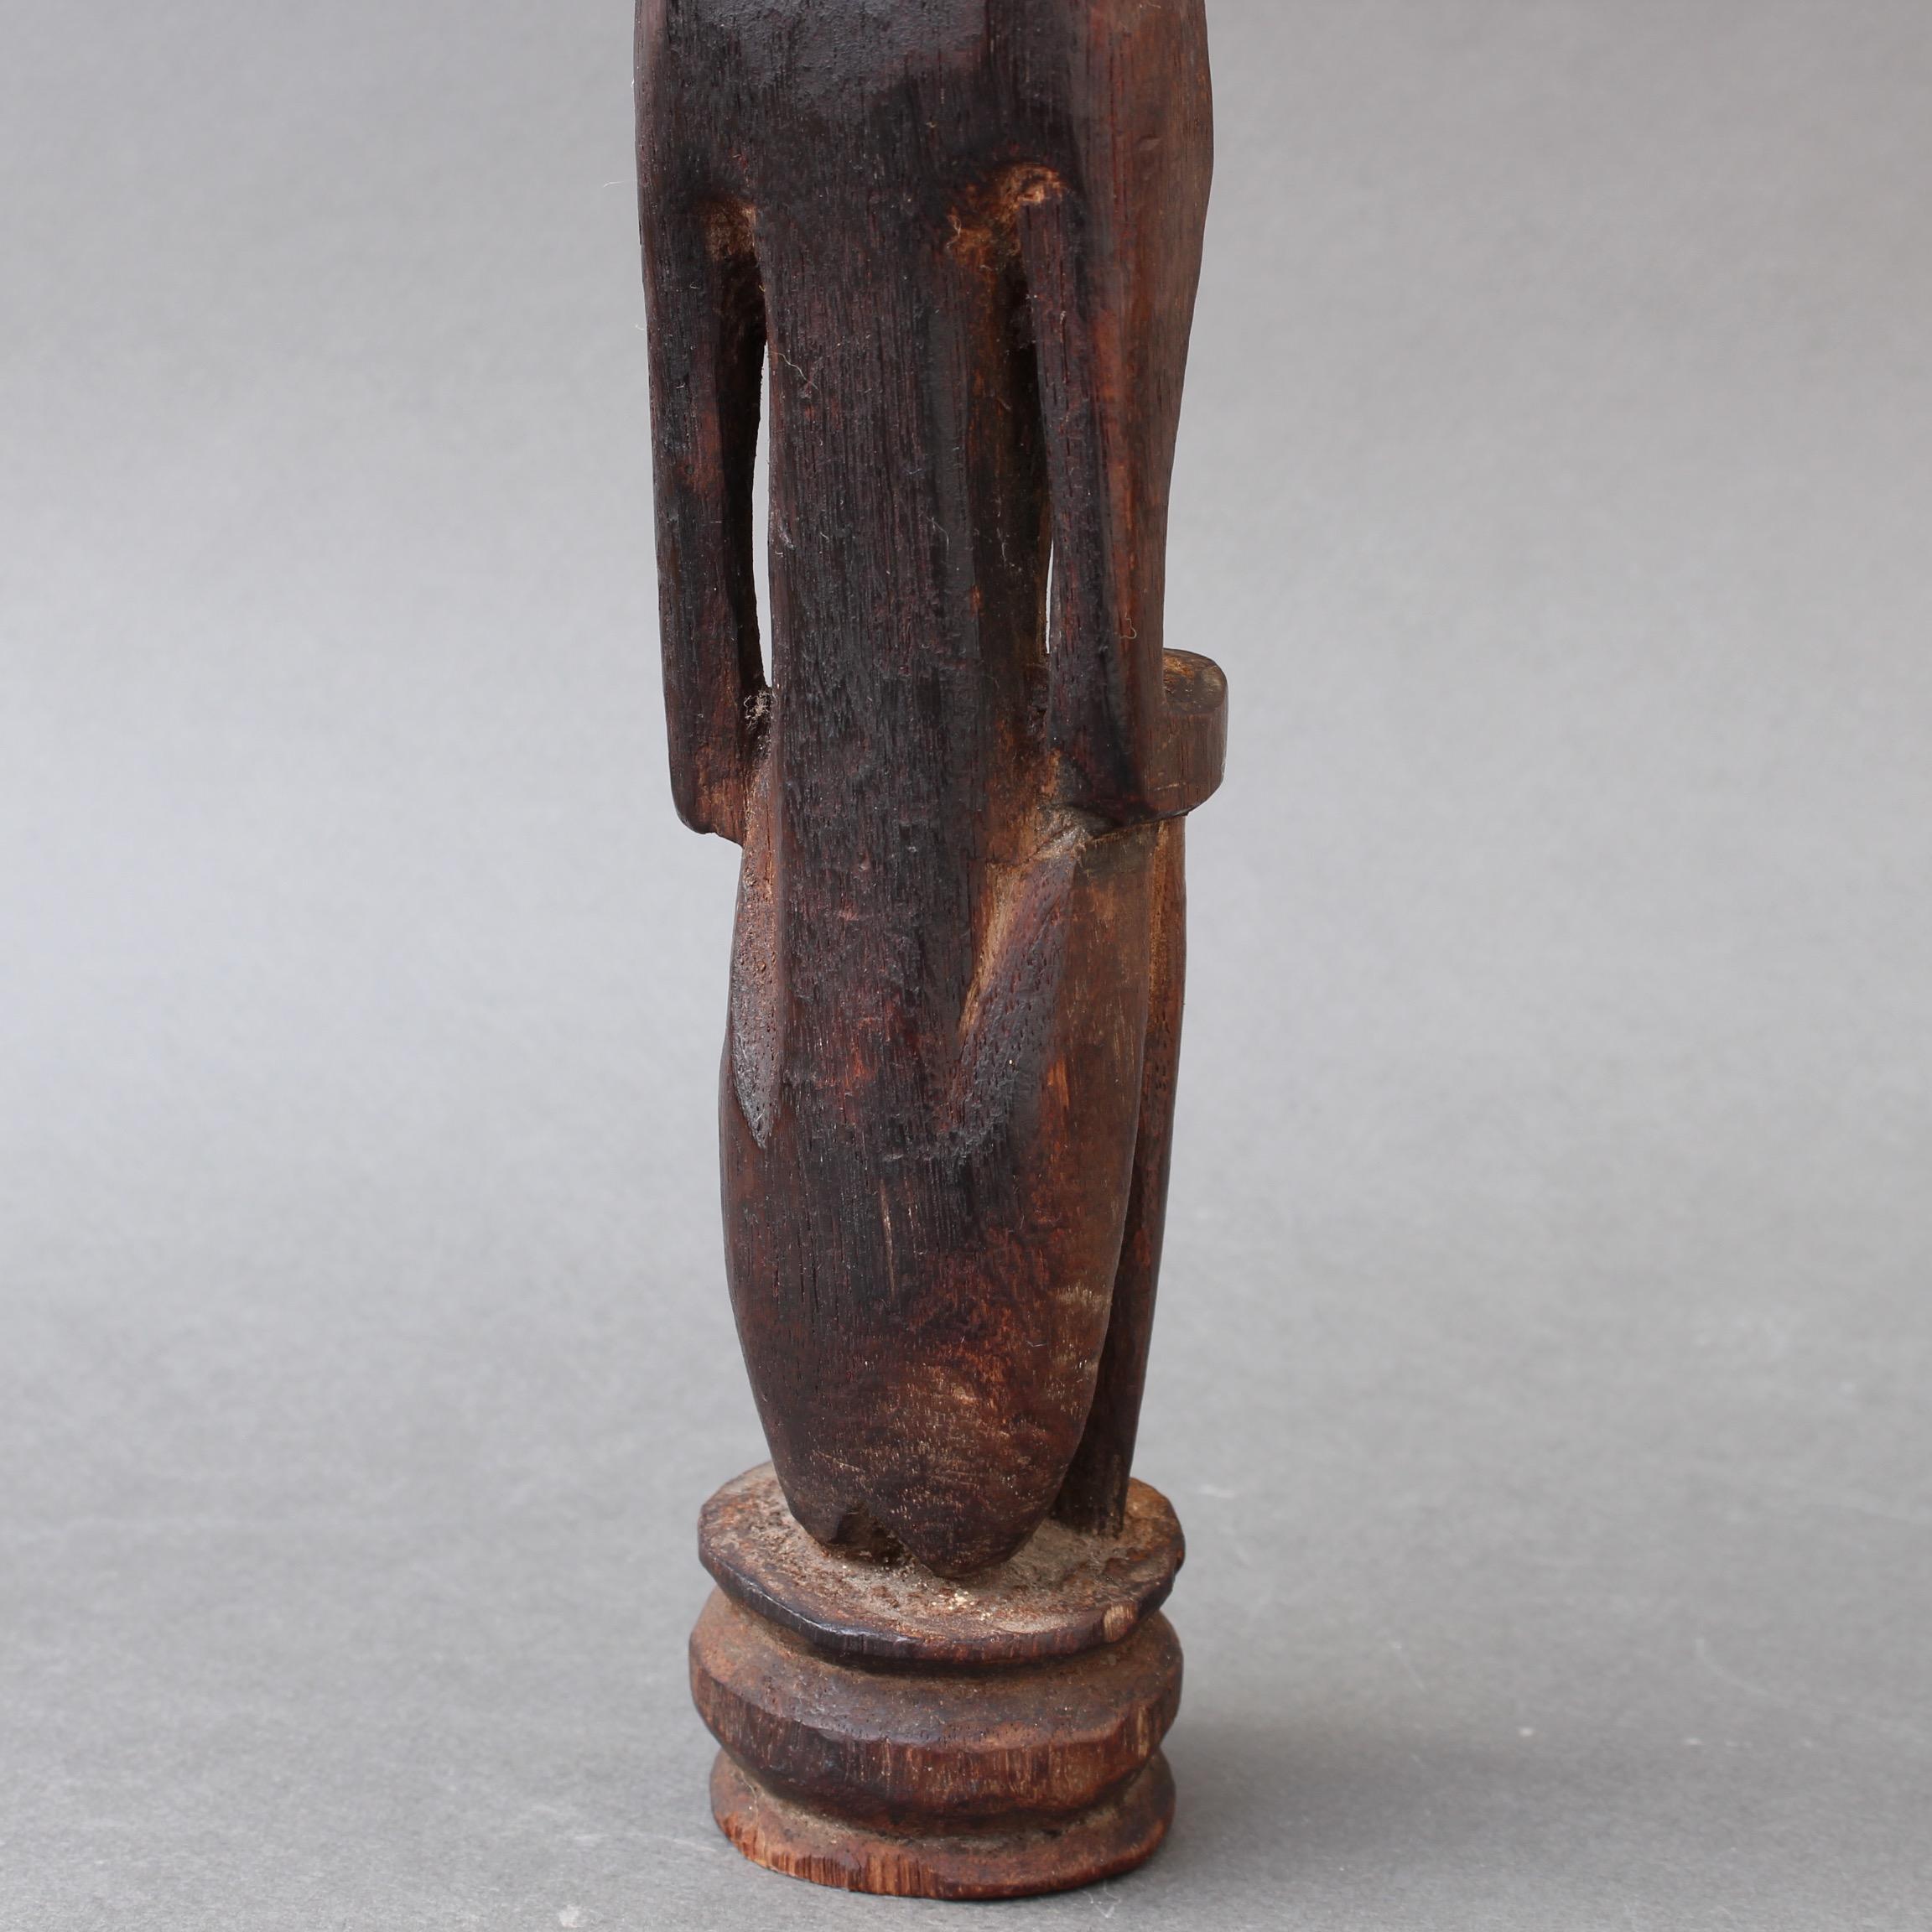 Wooden Sculpture or Carving of Sitting Figure from Sumba Island, Indonesia 11